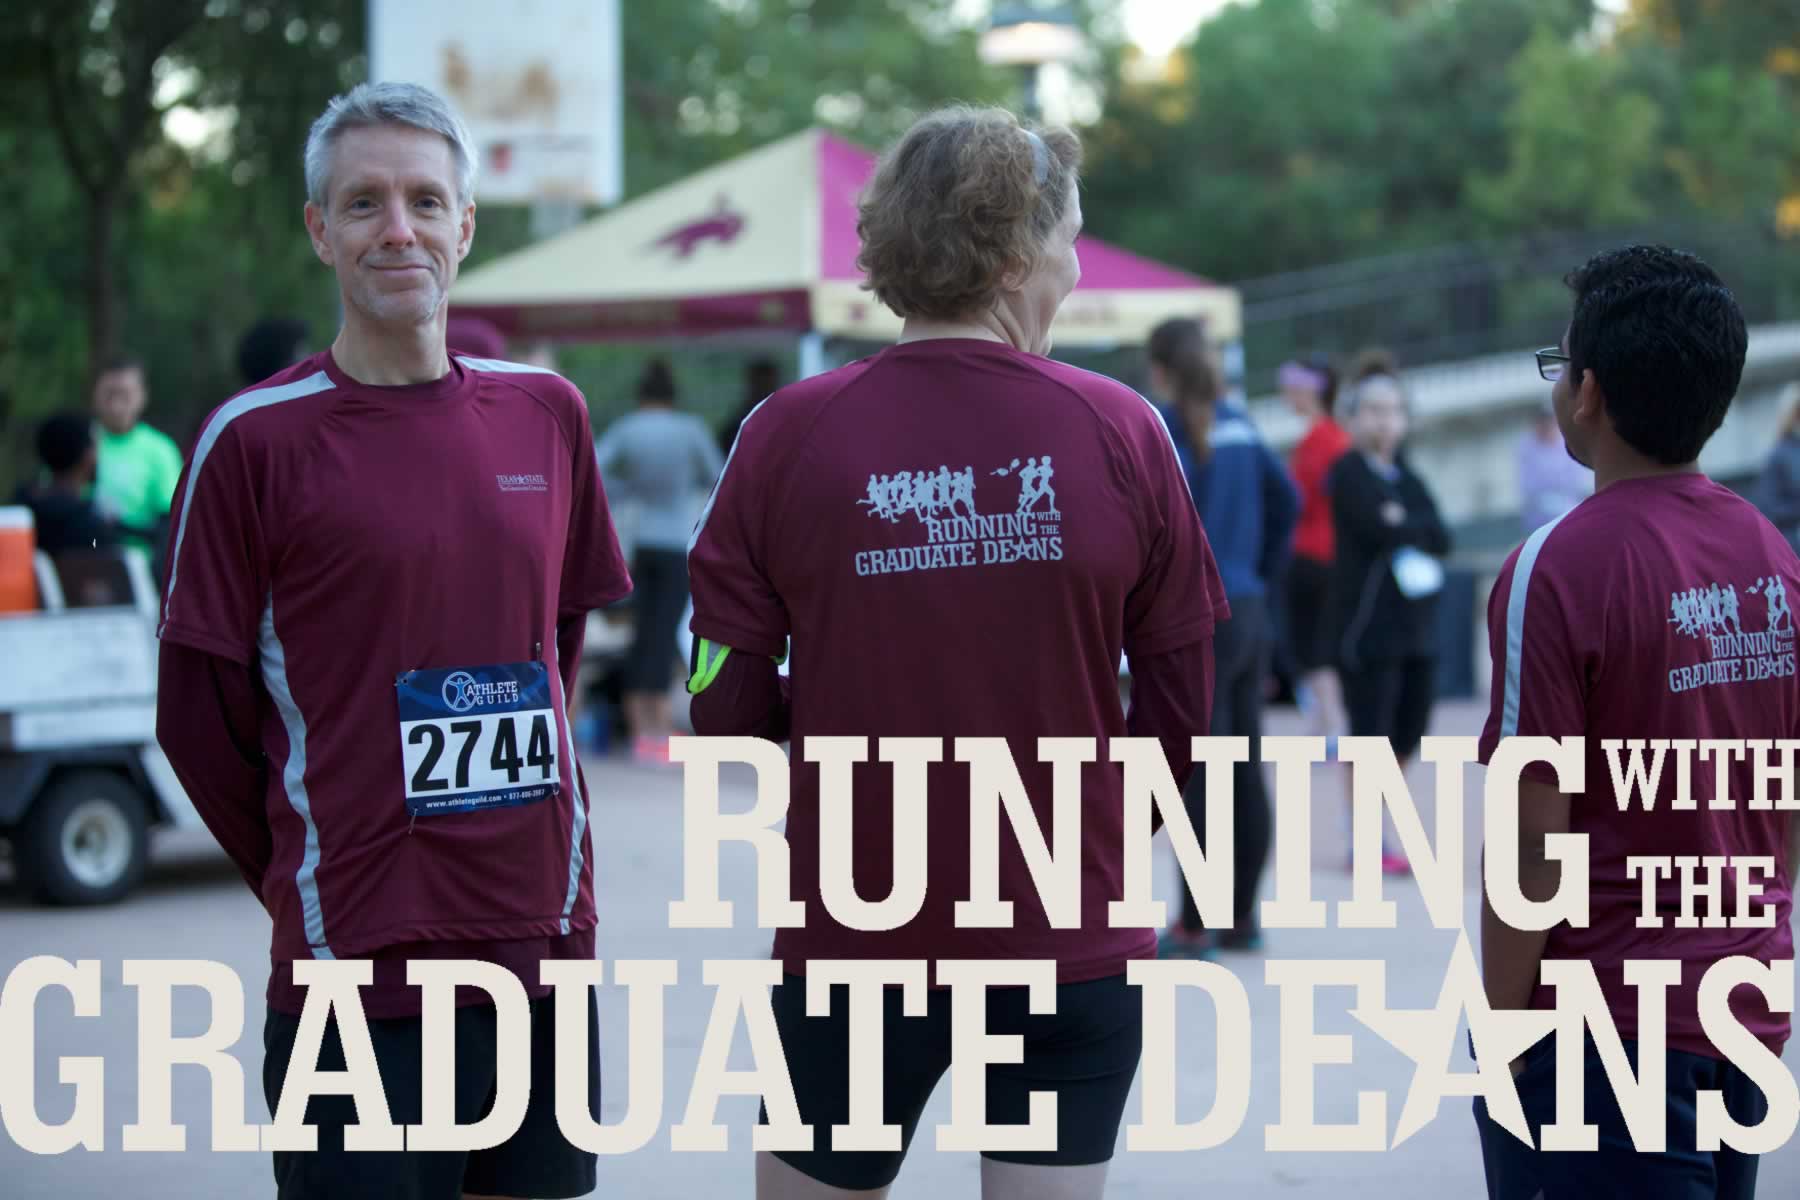 an image of the grad college deans in their running gear with text overlaid reading "running with the graduate deans"